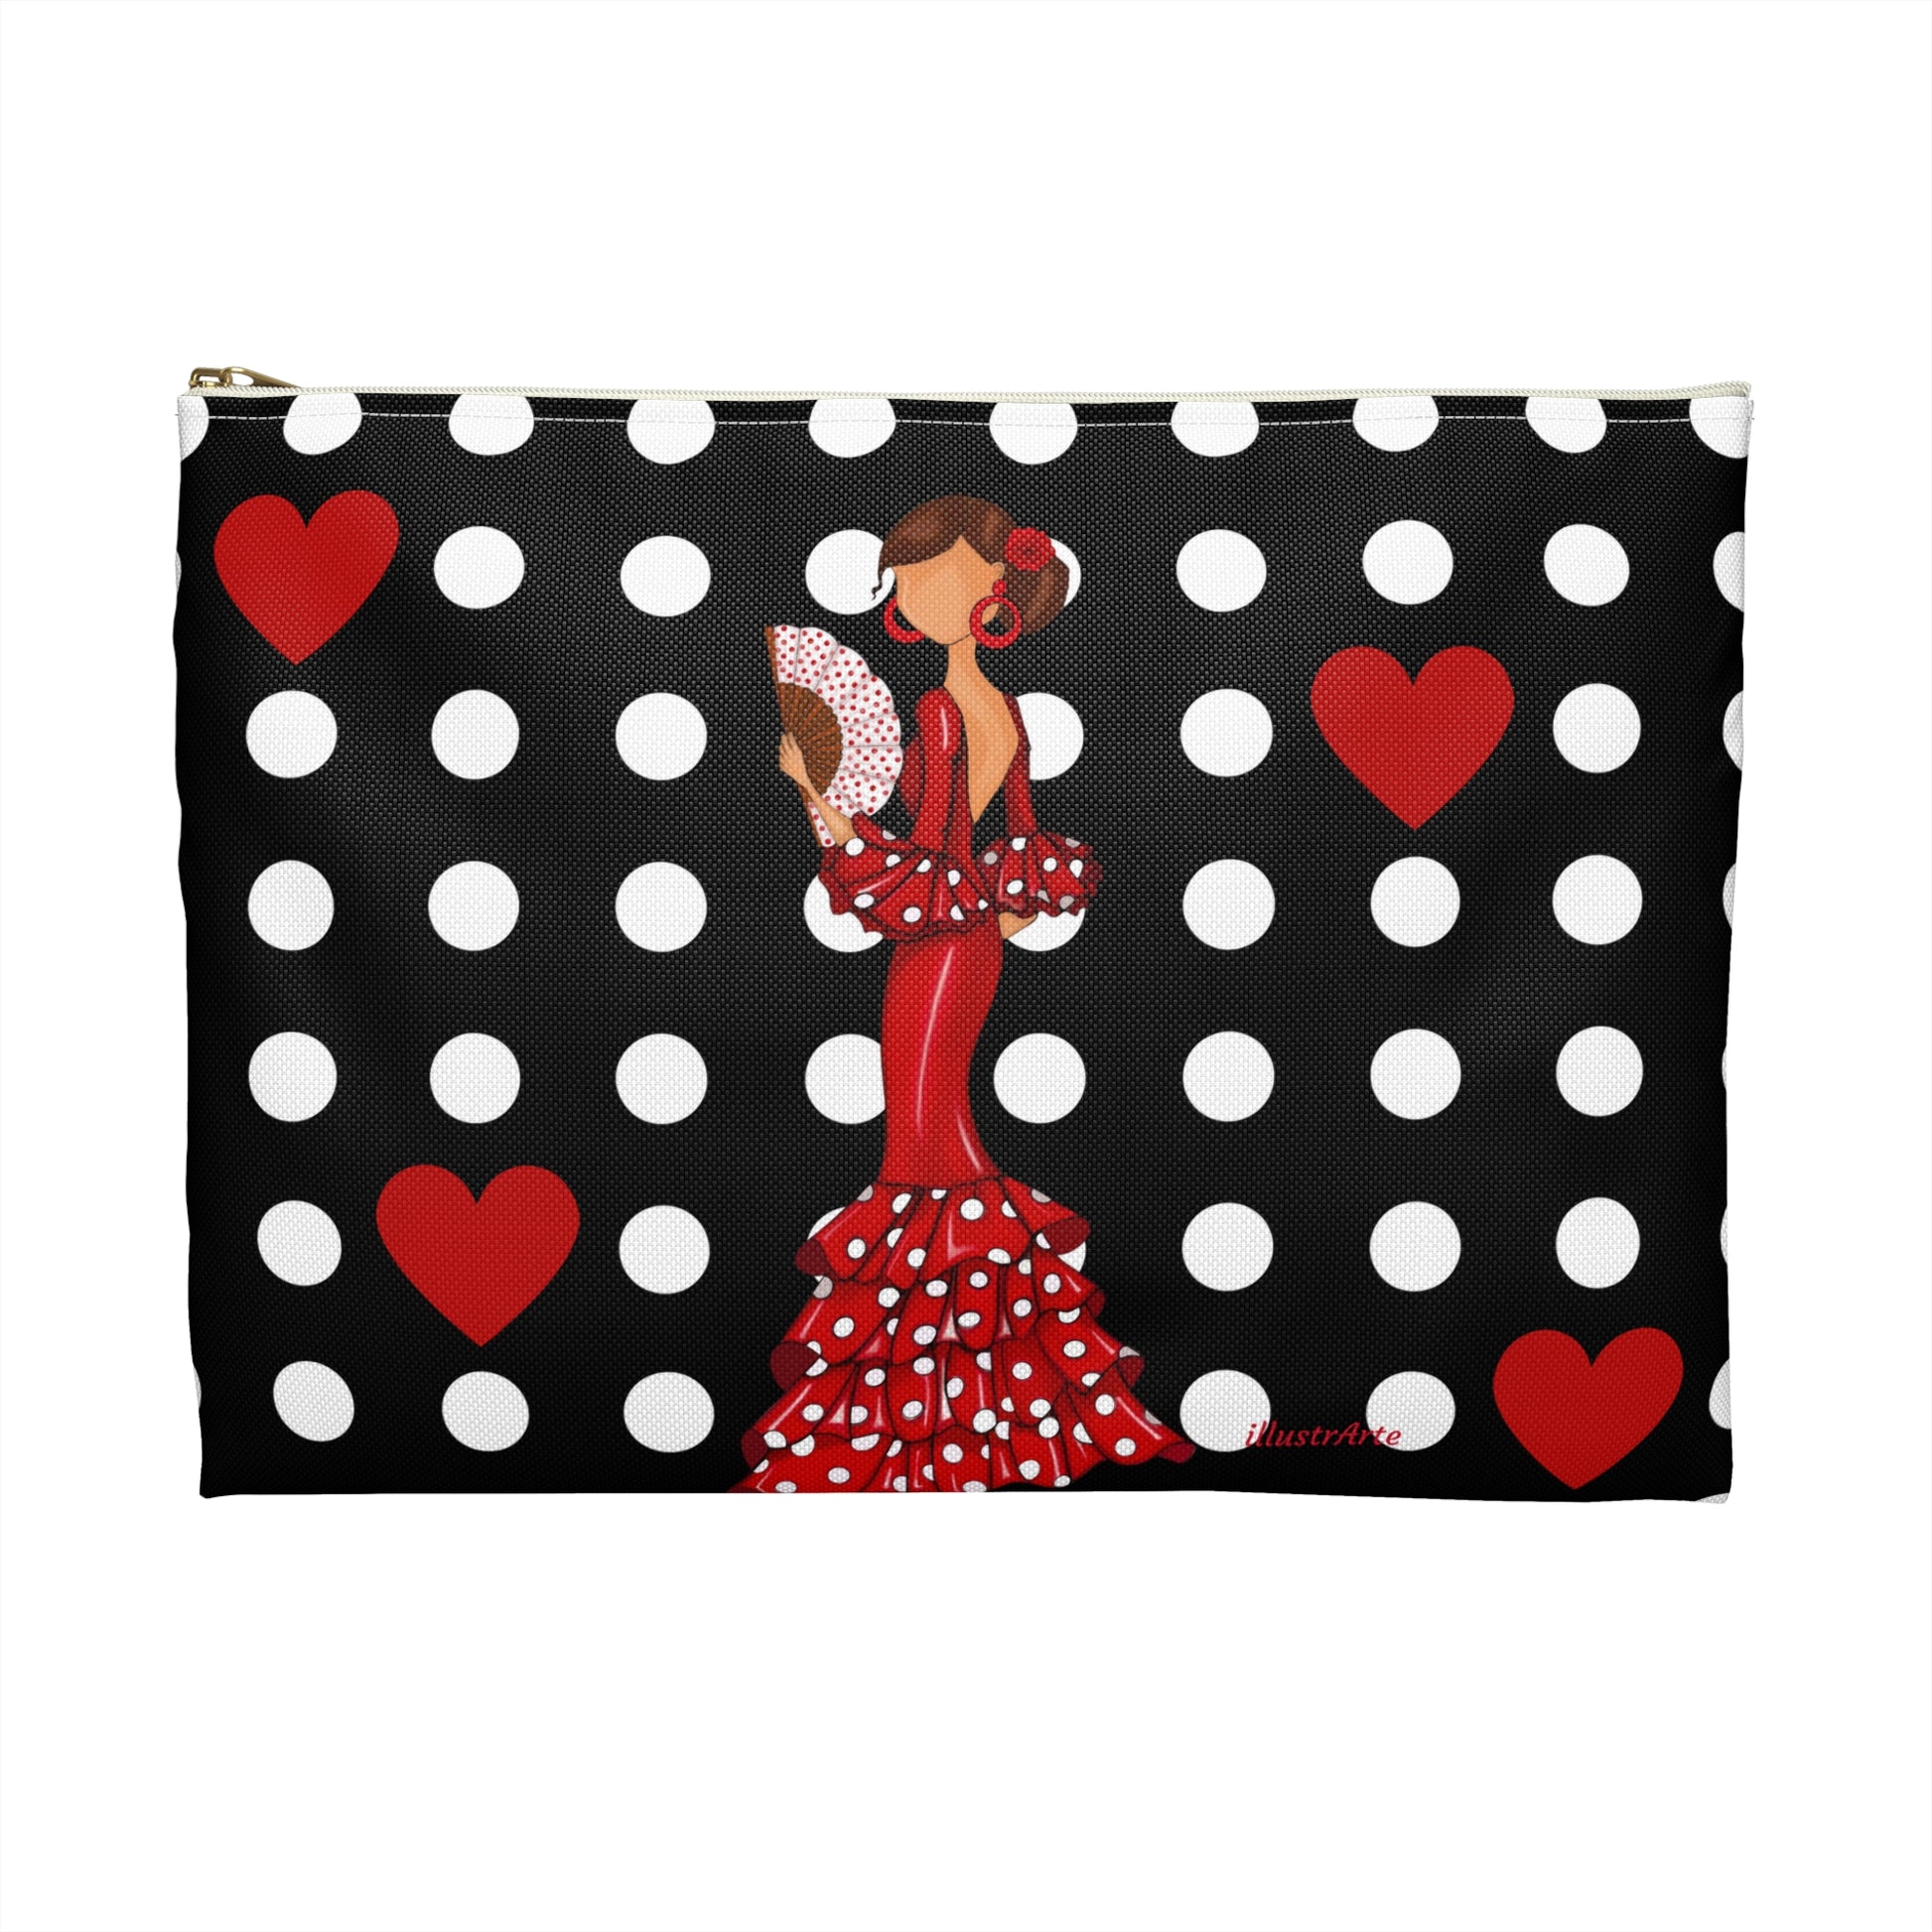 a black and white polka dot purse with a lady holding a fan